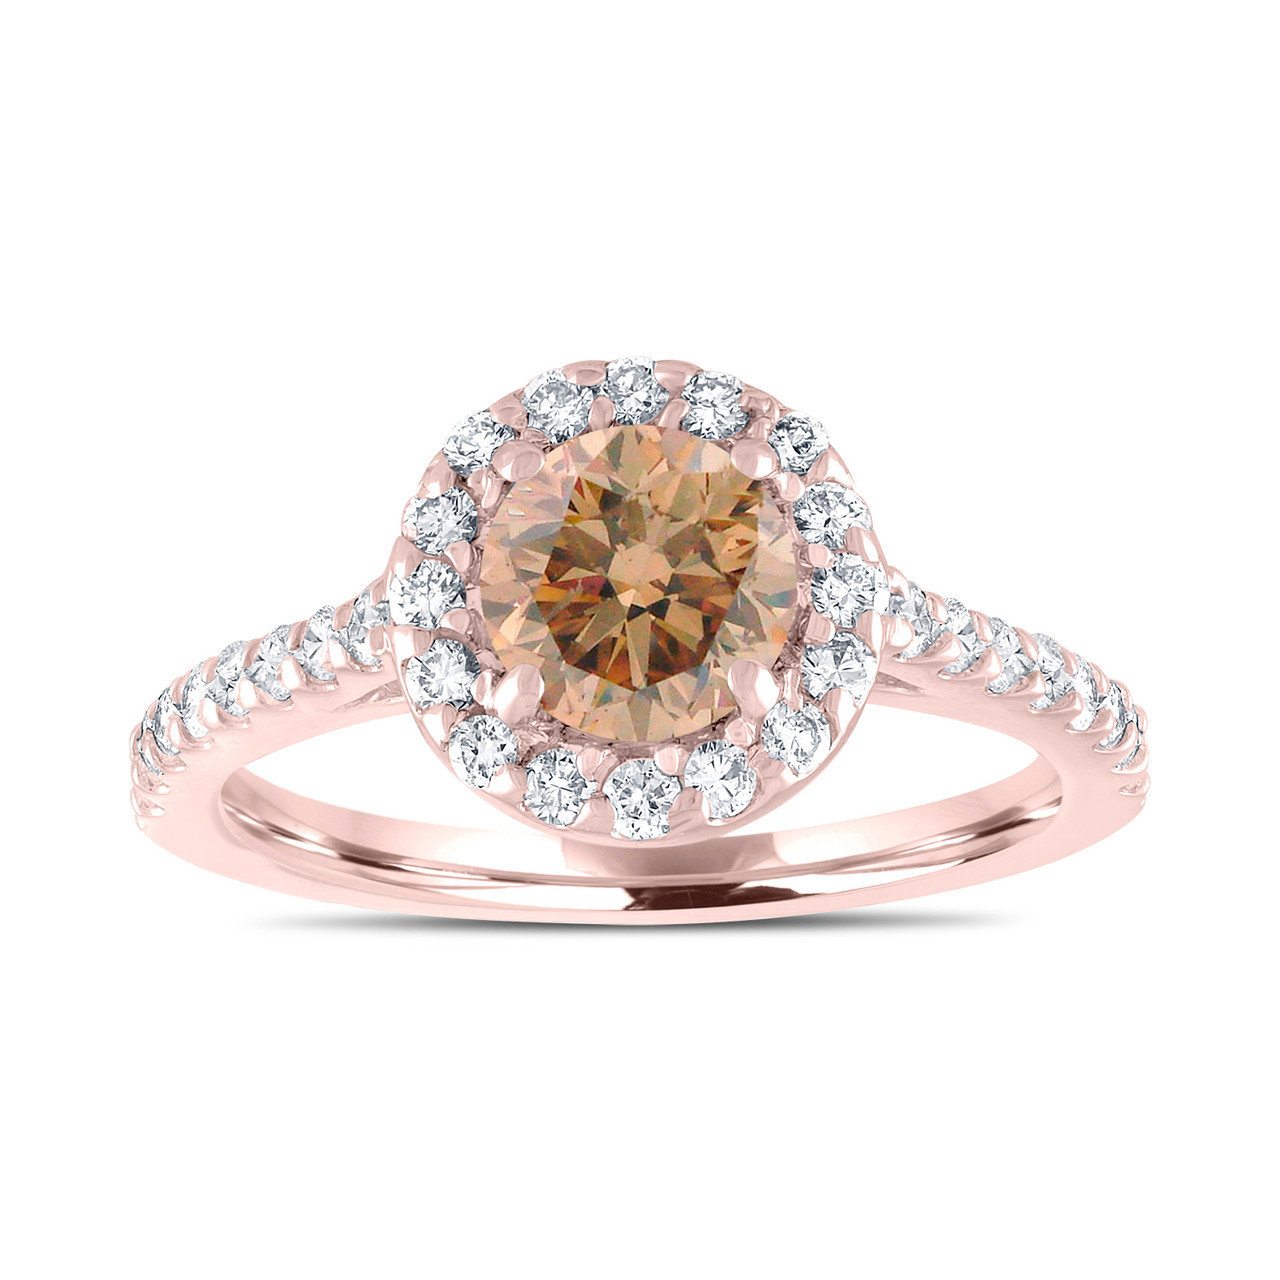  Rose  Gold  Champagne Diamond Engagement  Ring  Fancy Brown  